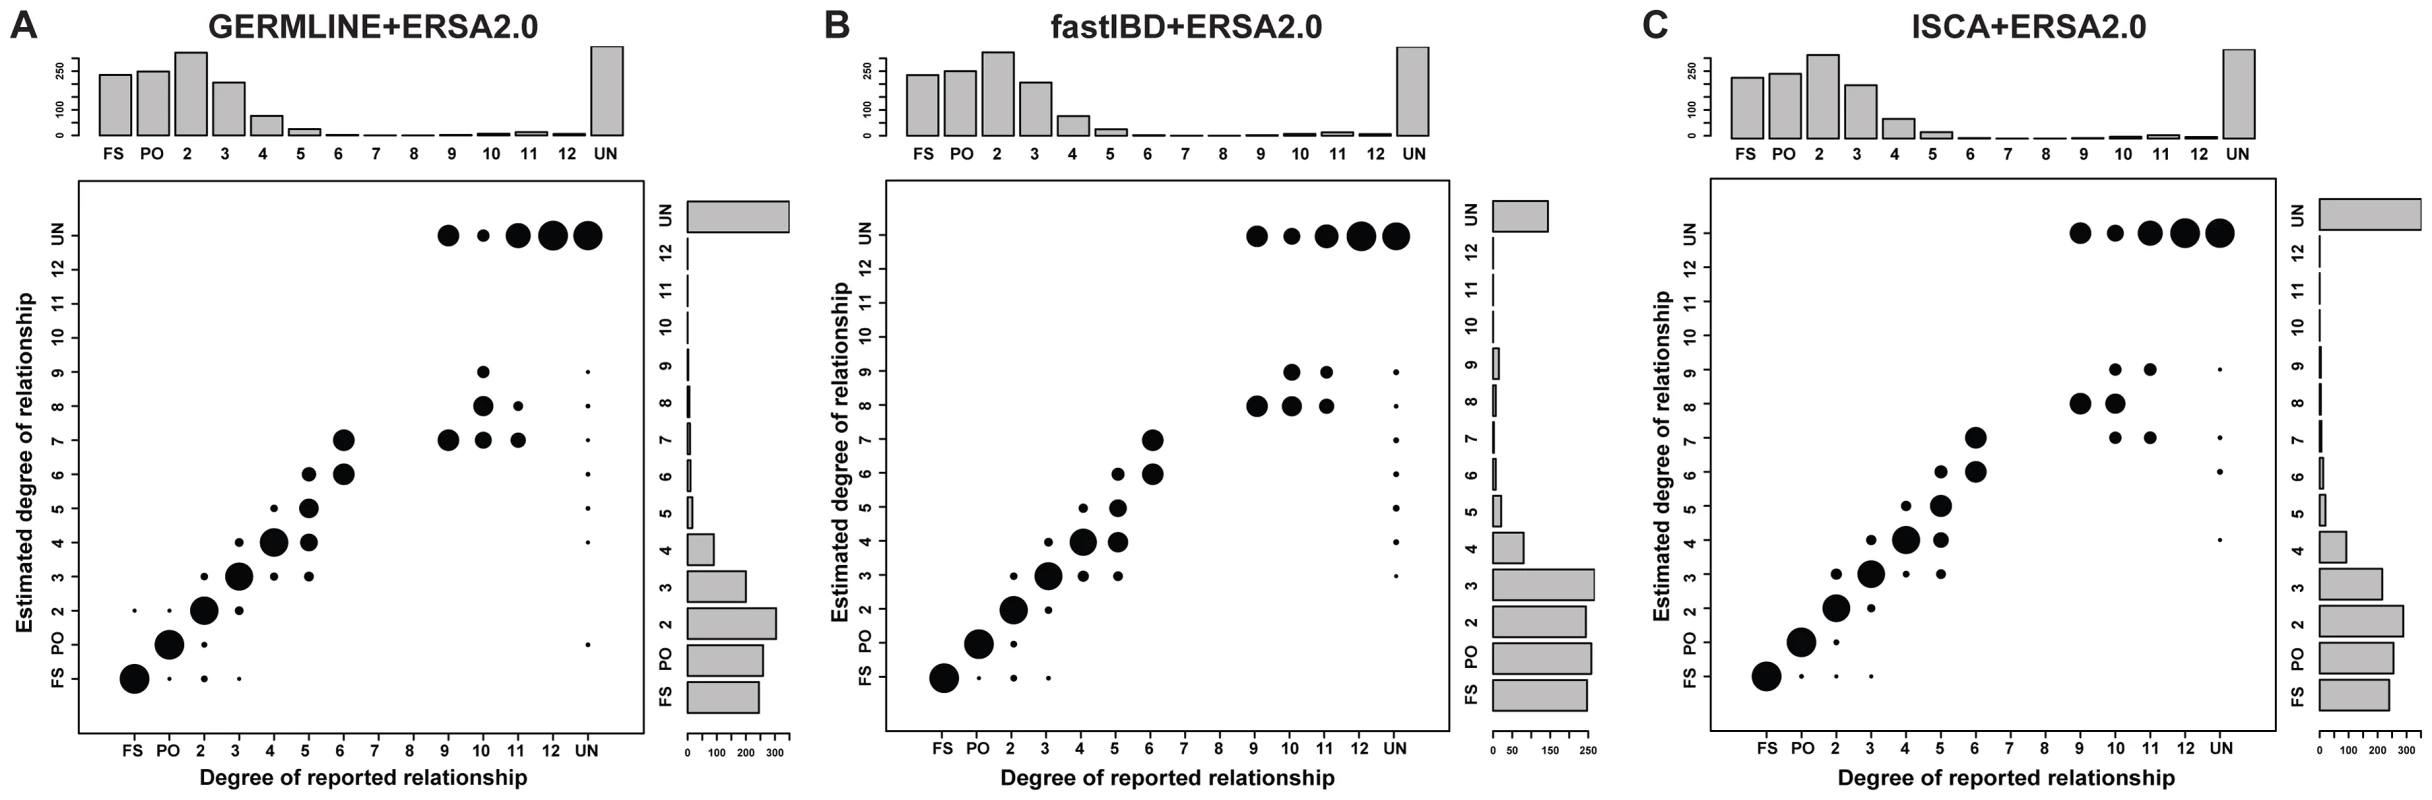 Performance of relationship estimation in 30 sequenced families using (A) GERMLINE-ERSA2.0, (B) fastIBD-ERSA2.0, and (C) ISCA-ERSA2.0.